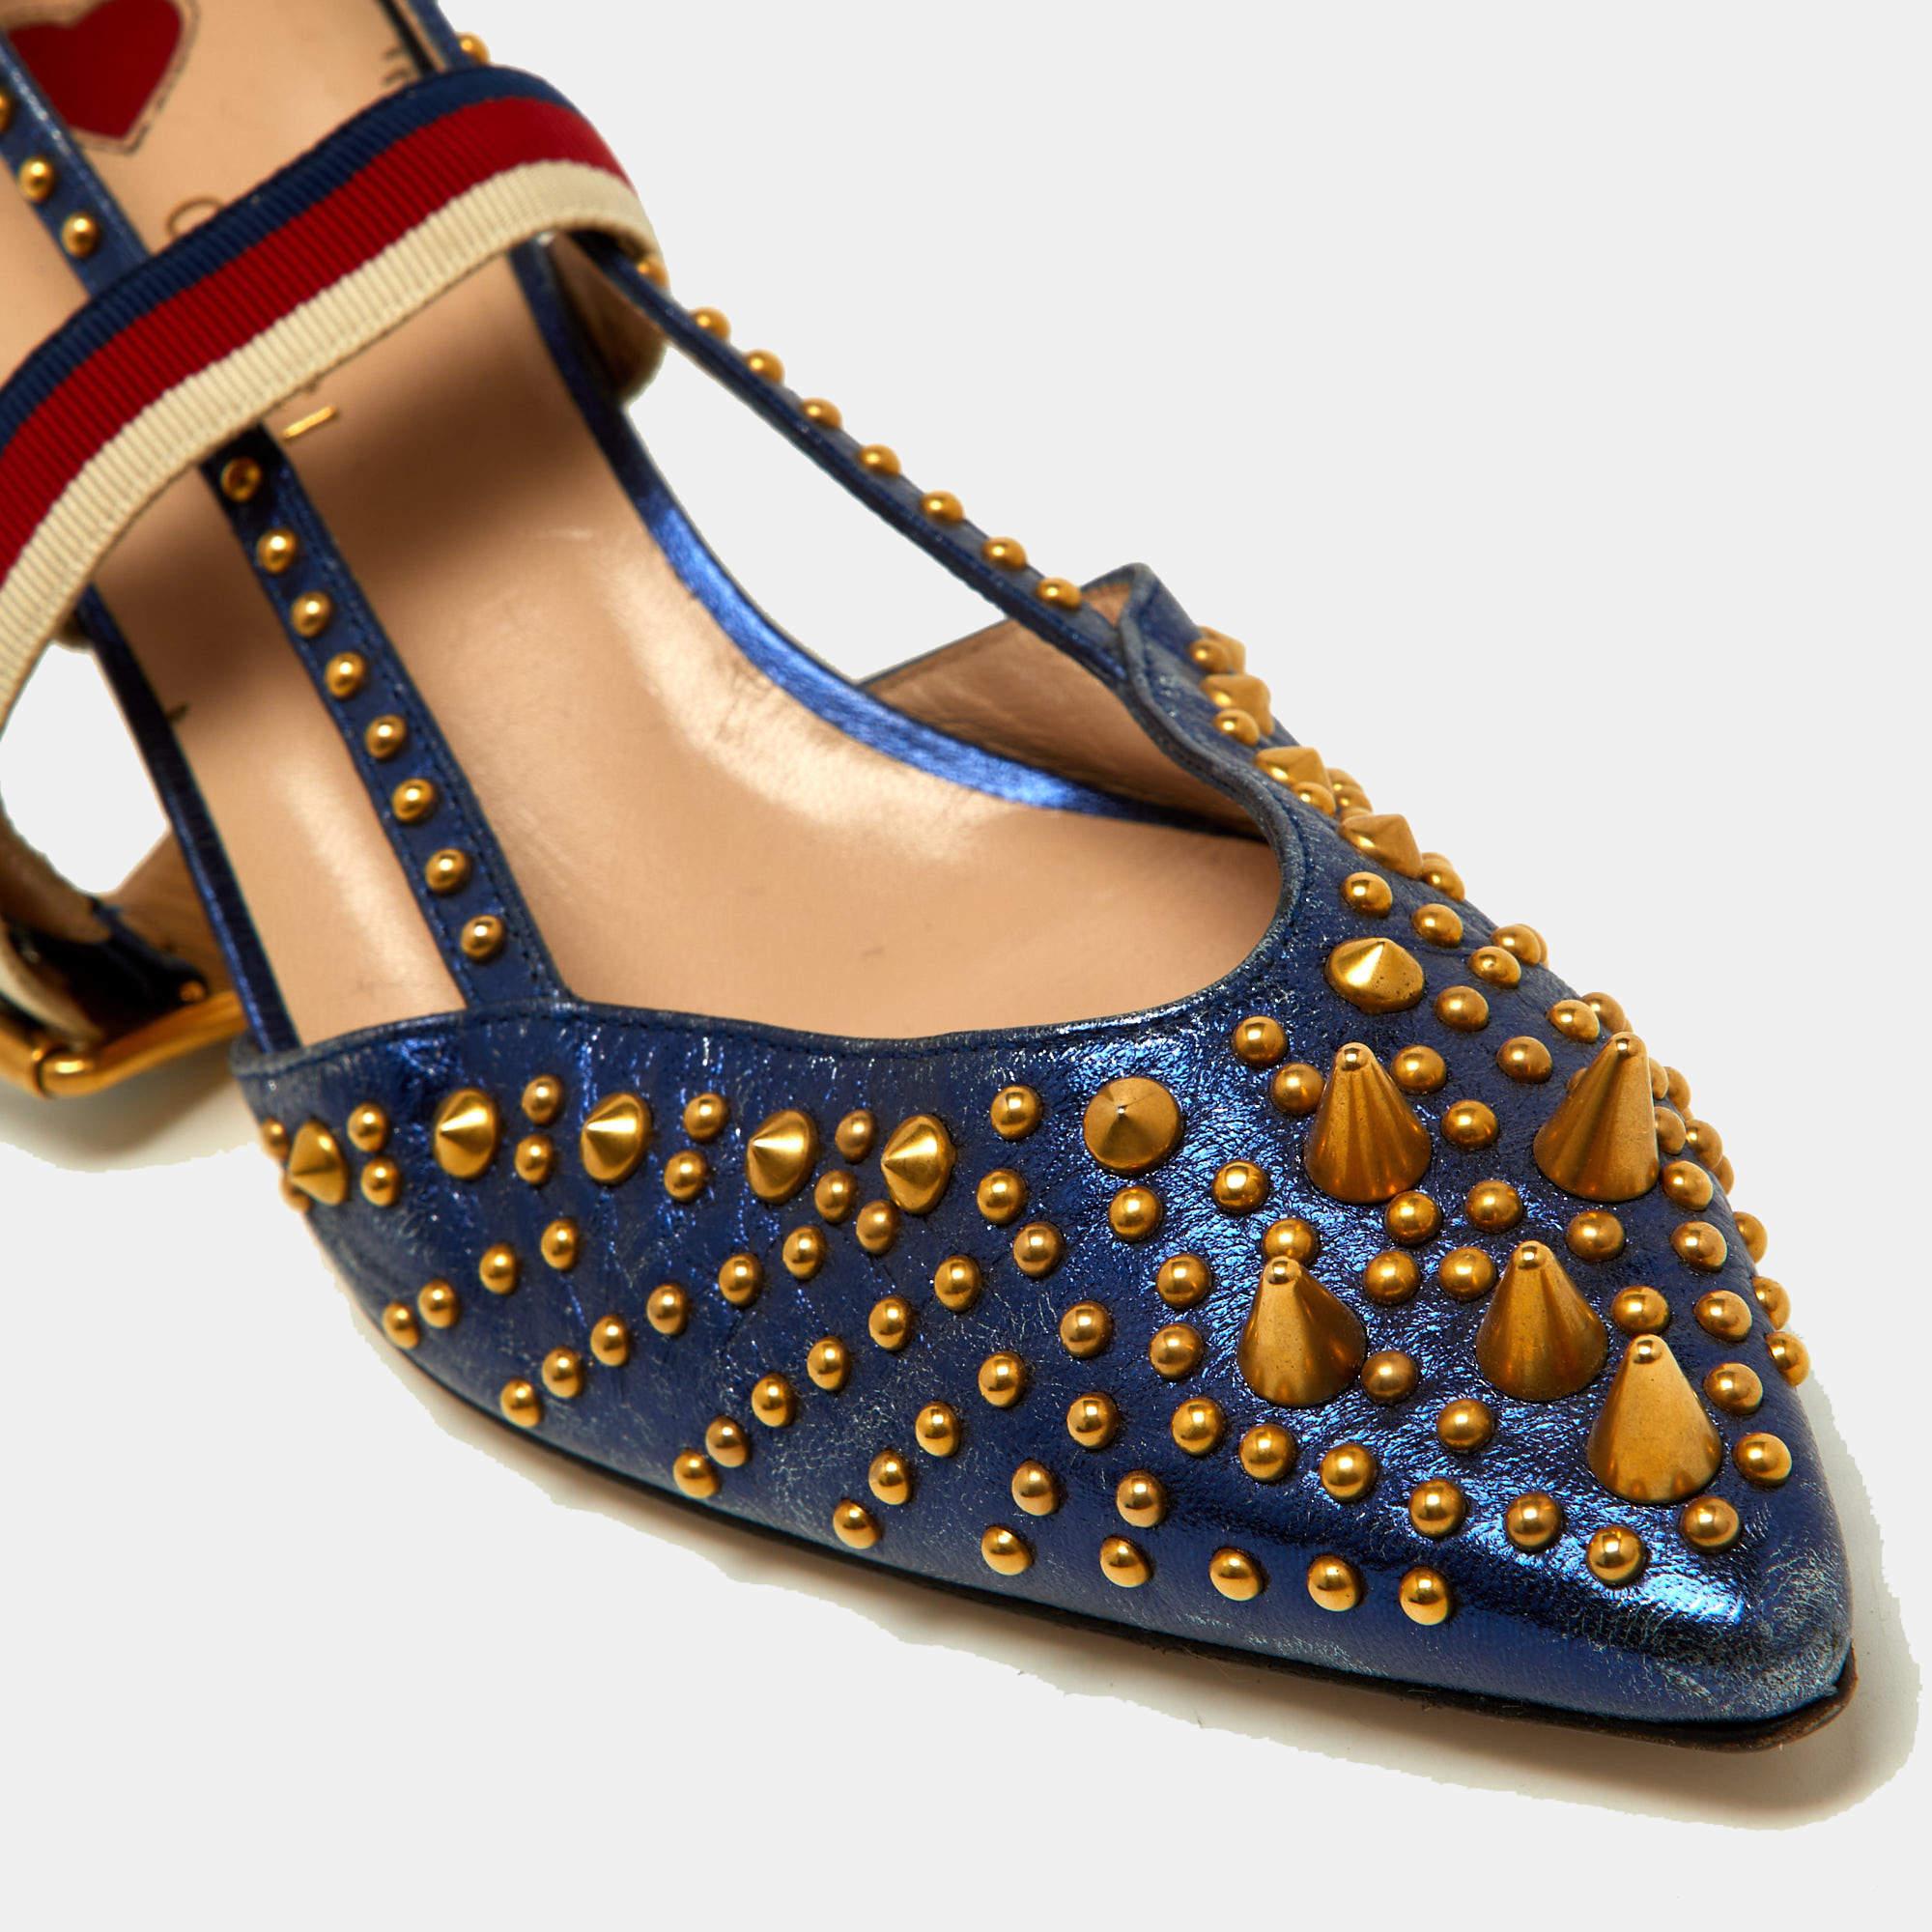 Gucci Metallic Blue Leather Unia Studded Pointed Toe Pumps Size 38 For Sale 1